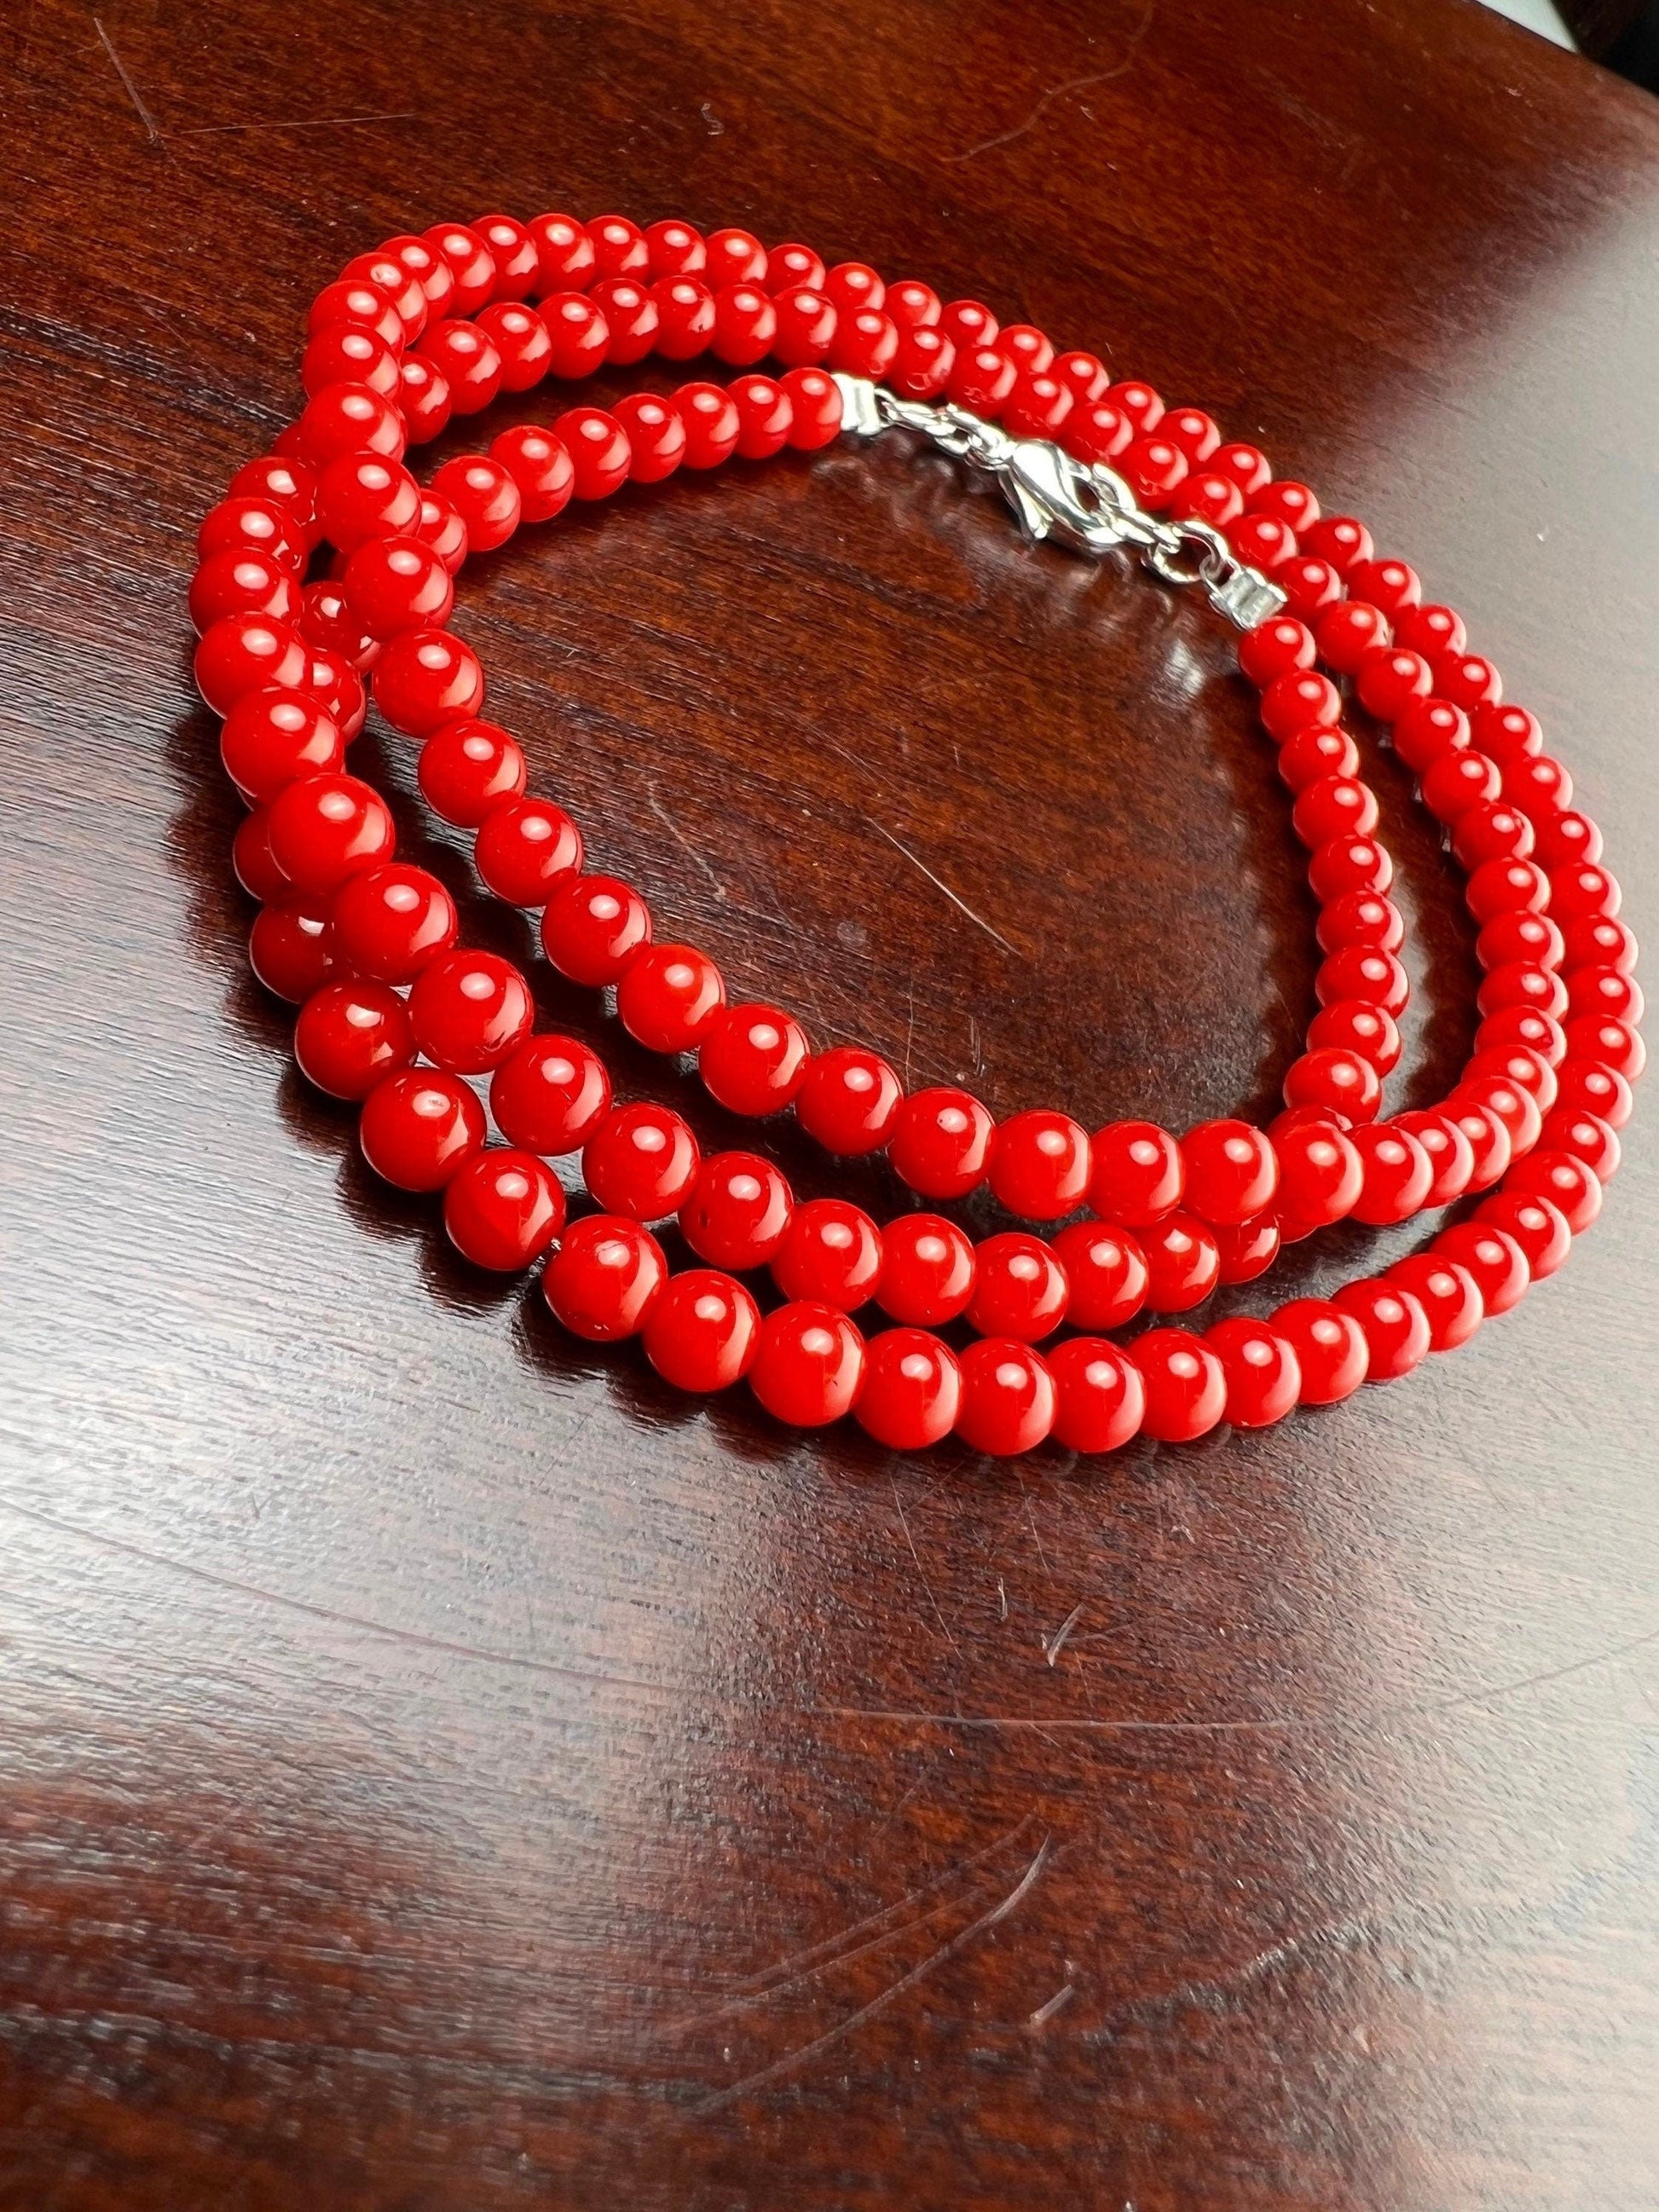 Bamboo Coral Red 4mm Smooth Round Genuine AAA Quality Necklace silver Lobster Clasp, Beach, Boho Gift for her,October Birthstone